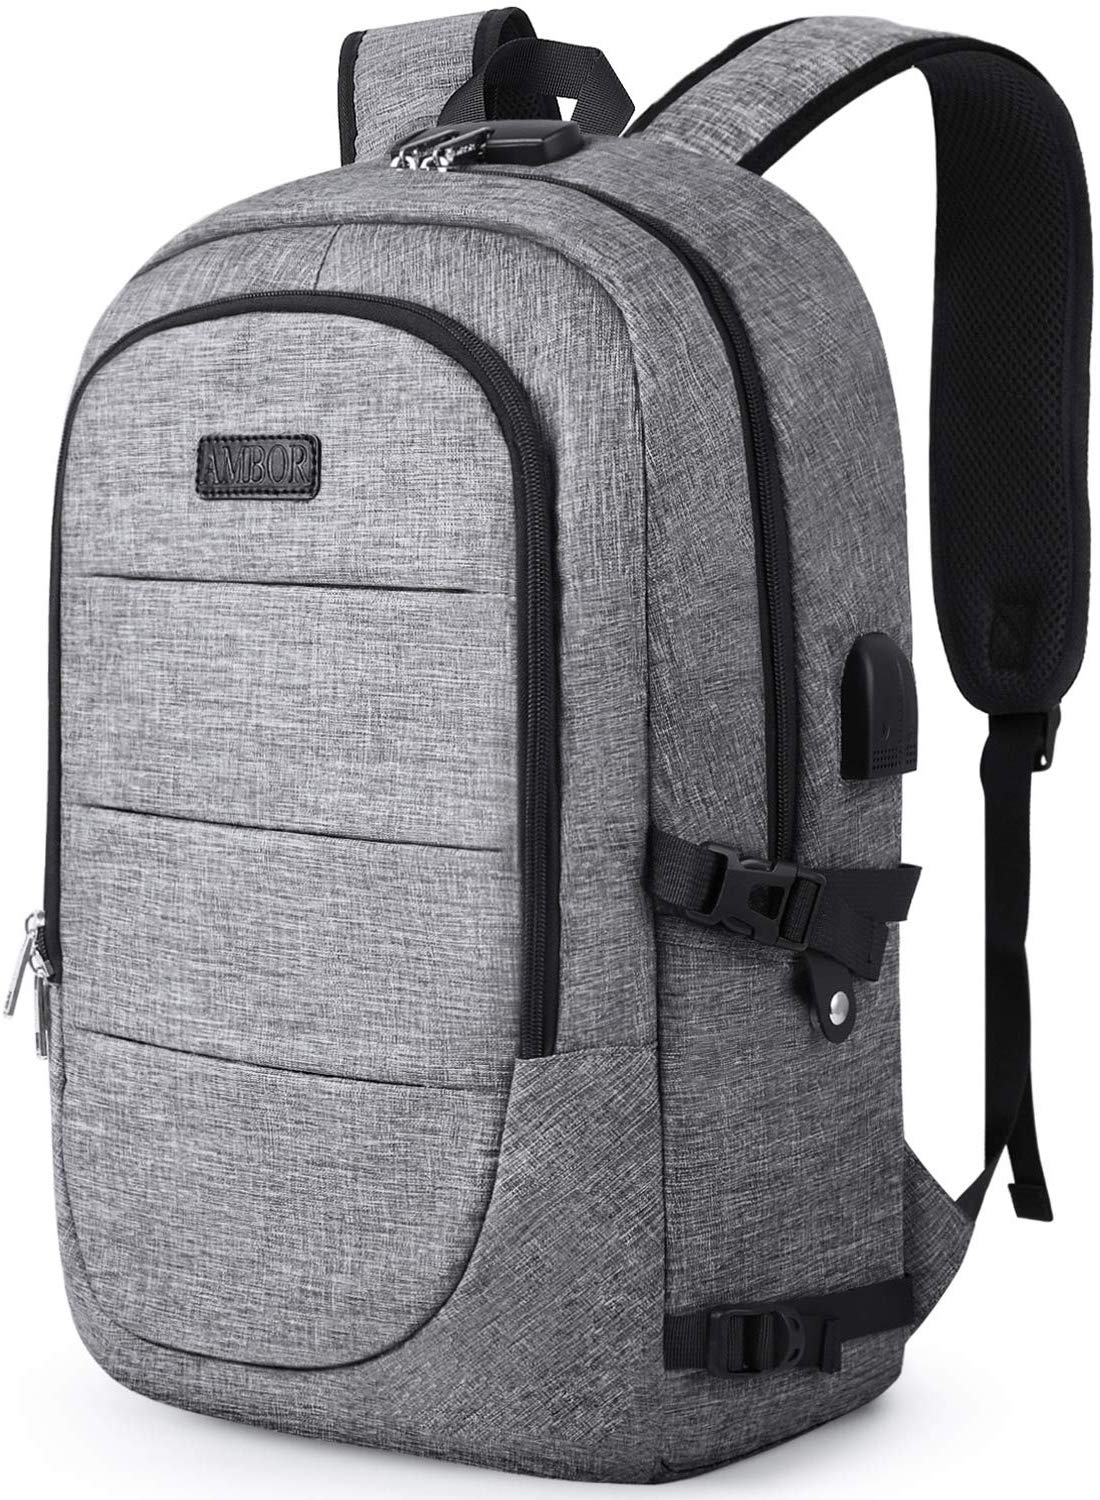 Anti Theft Business Backpack with USB Charging Port and Headphone Interface $16.99 (REG $35.99)